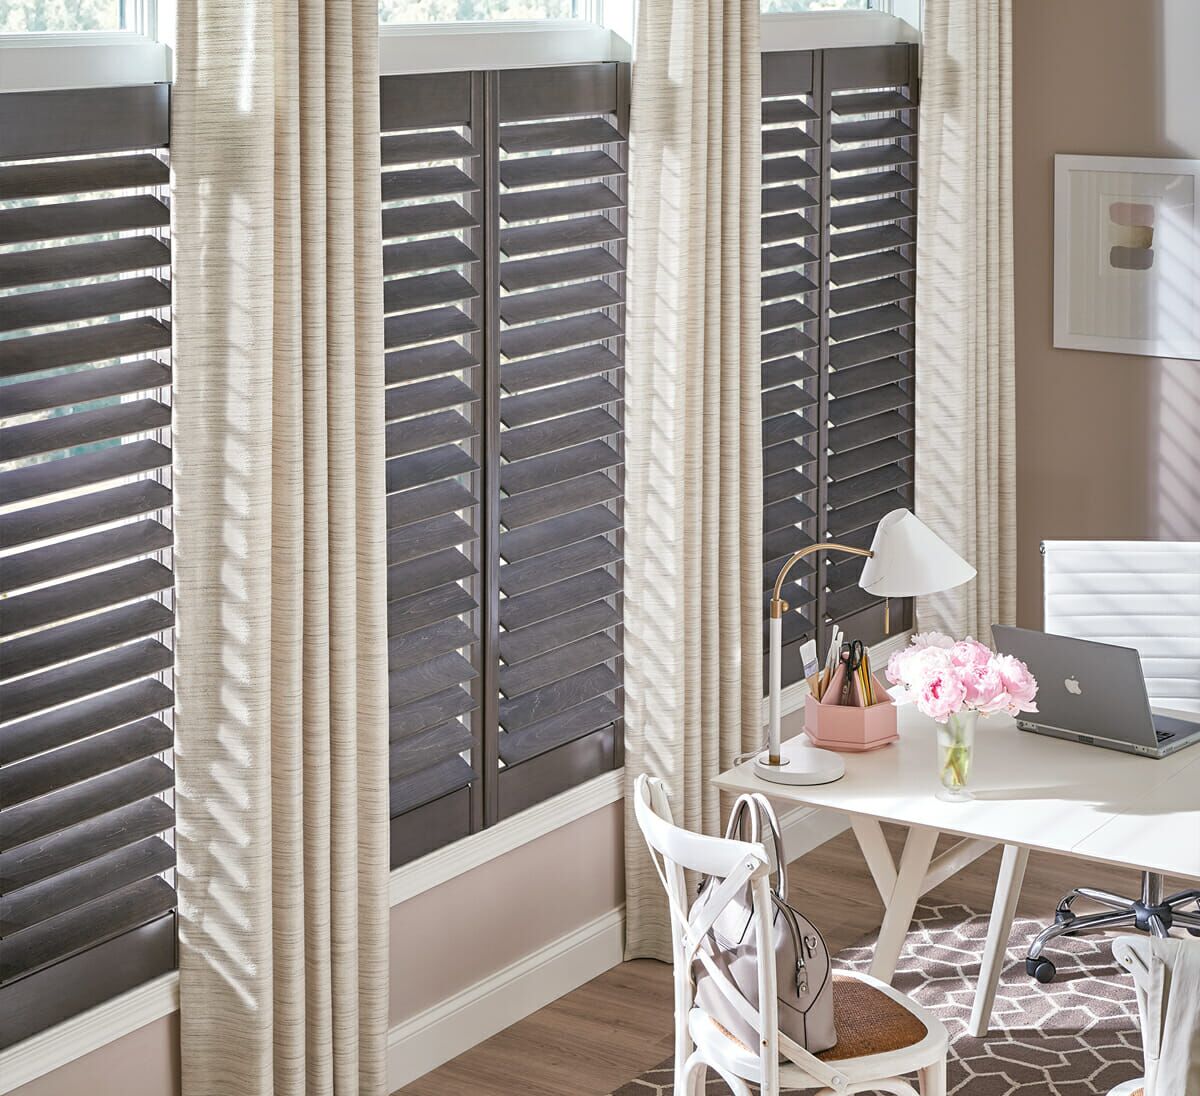 Pairing classic shutters with floor-to-ceiling linen drapes